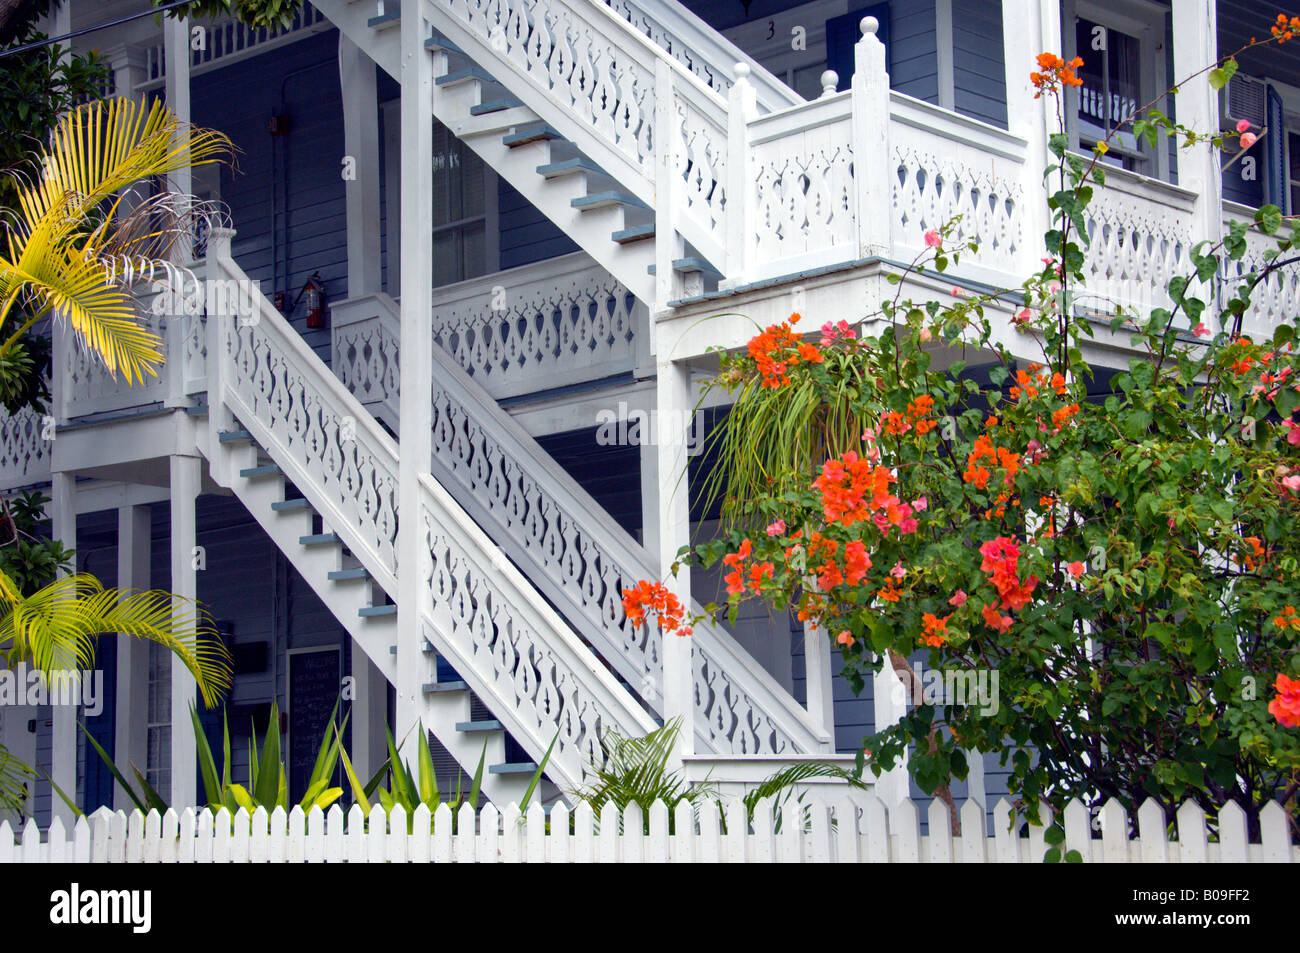 Staircases and balconies with flowers in Key West Florida USA Stock Photo